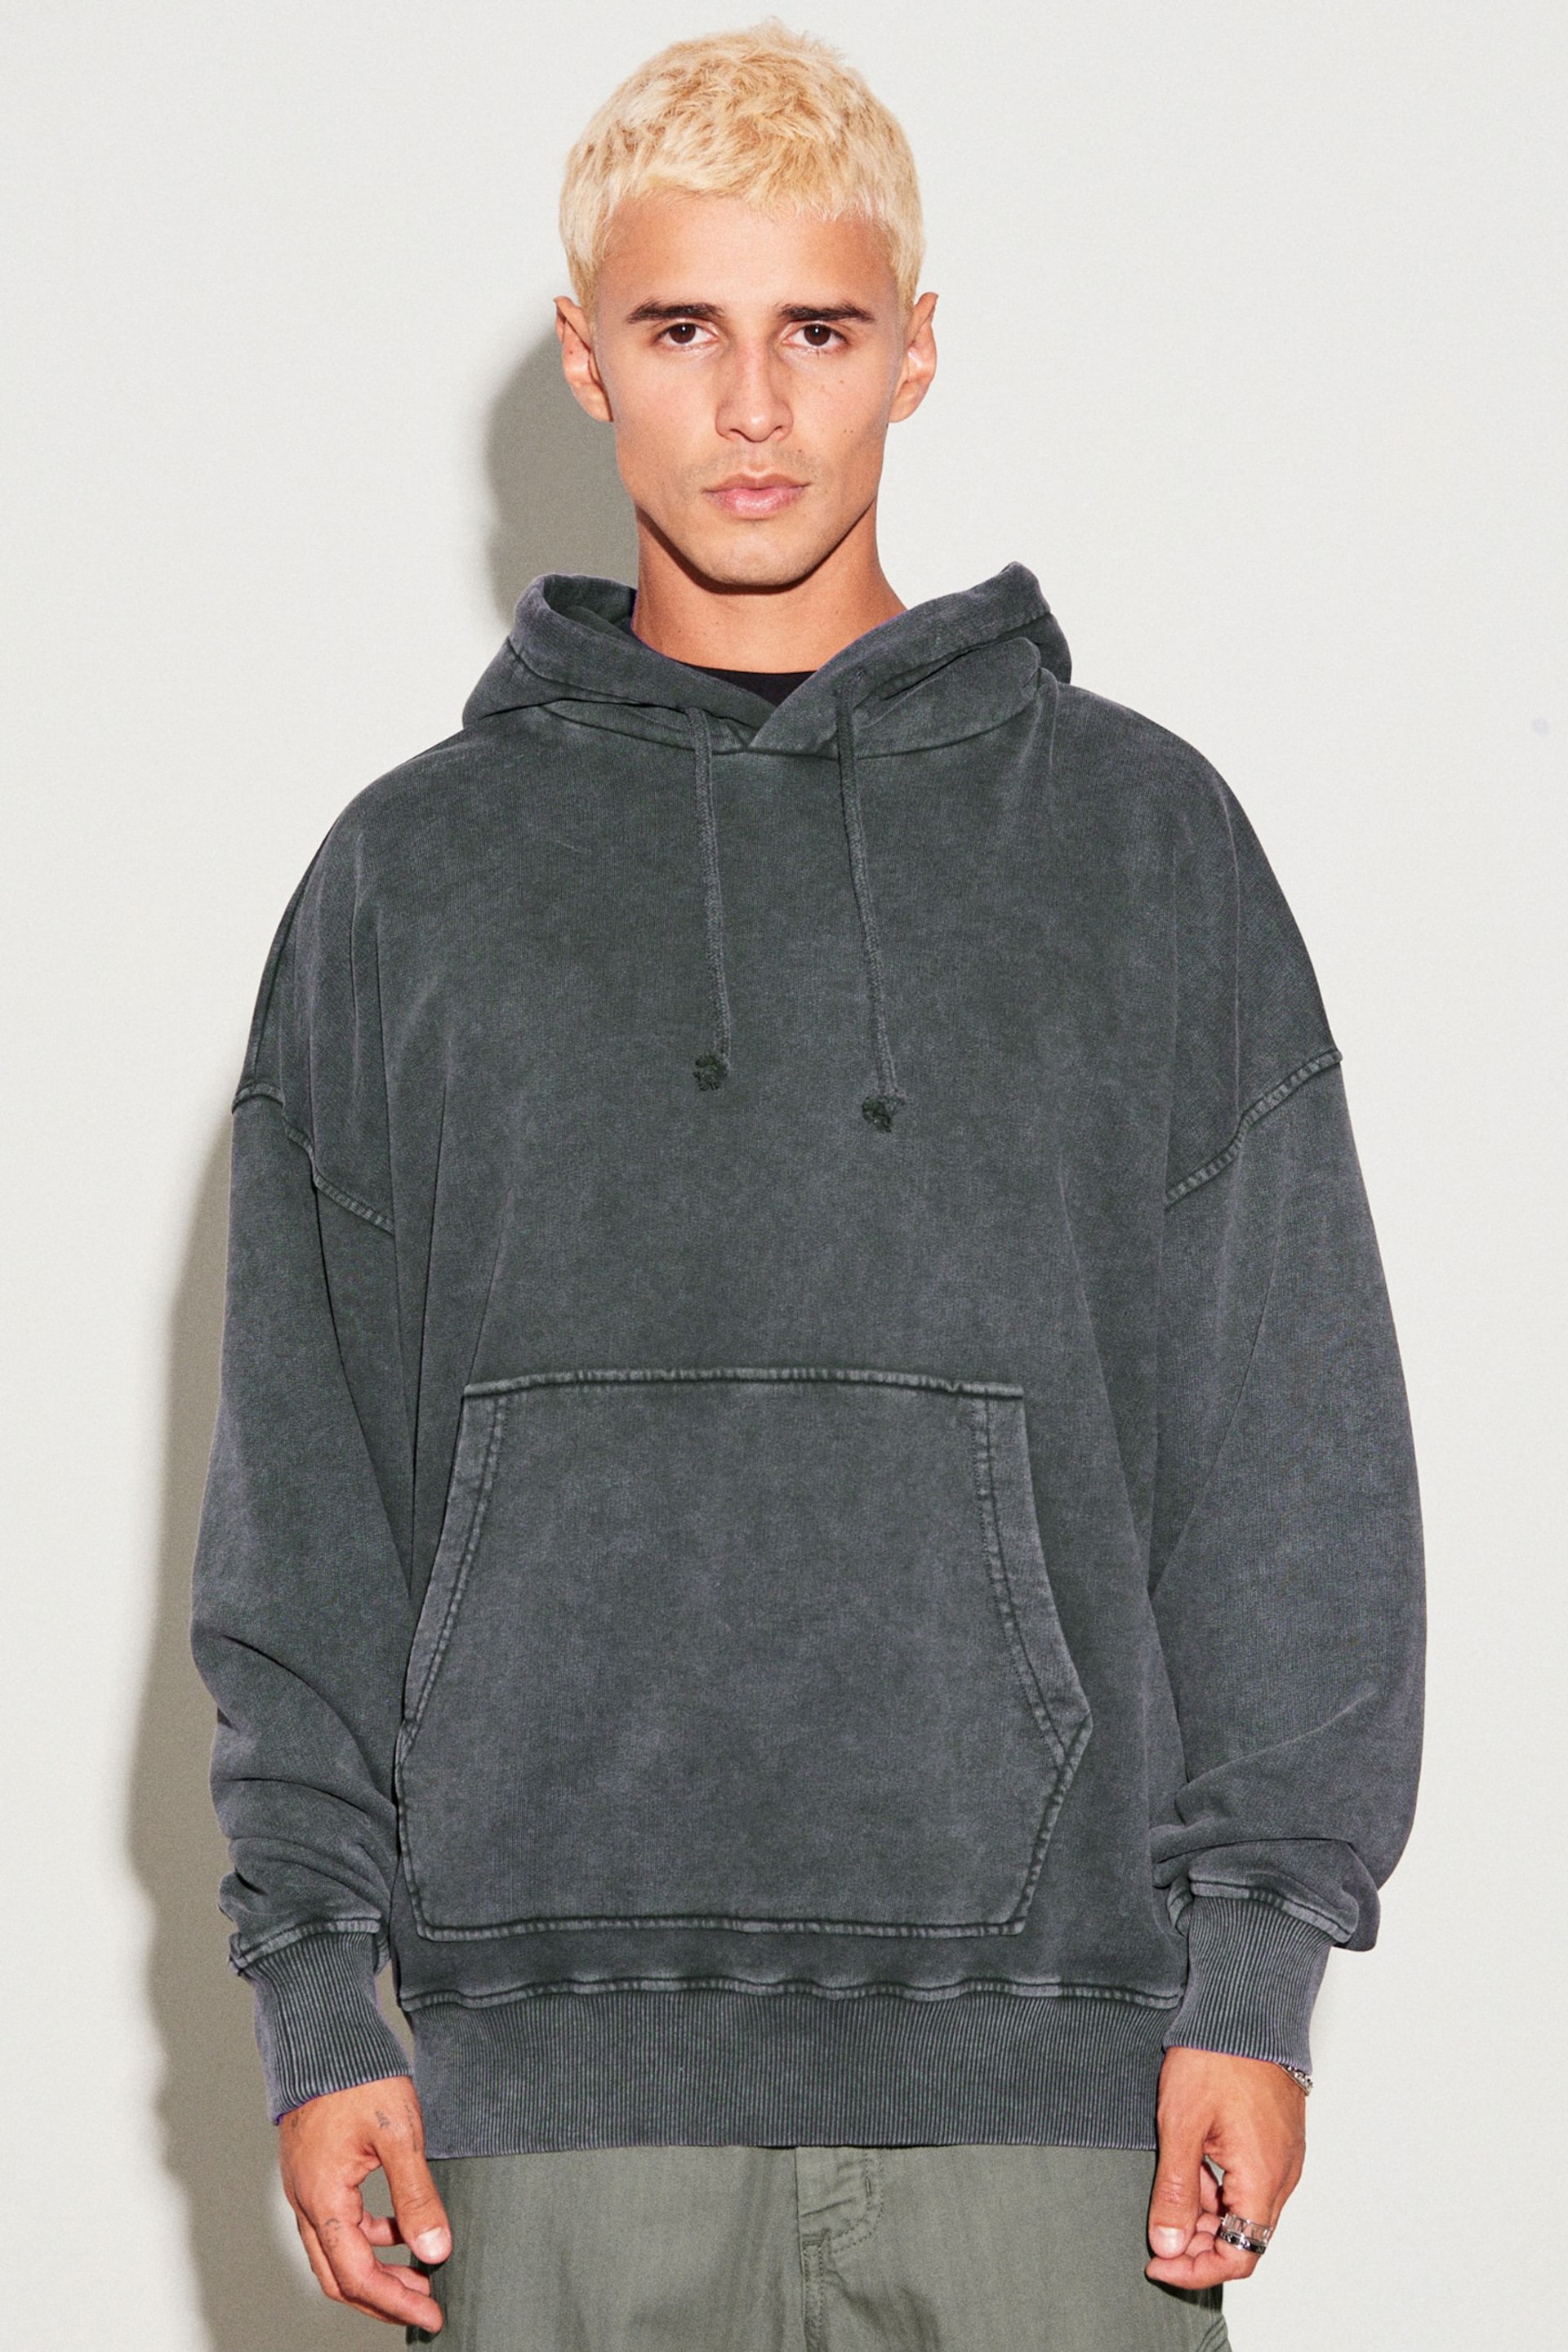 Charcoal Grey Garment Washed Hoodie - Image 1 of 8